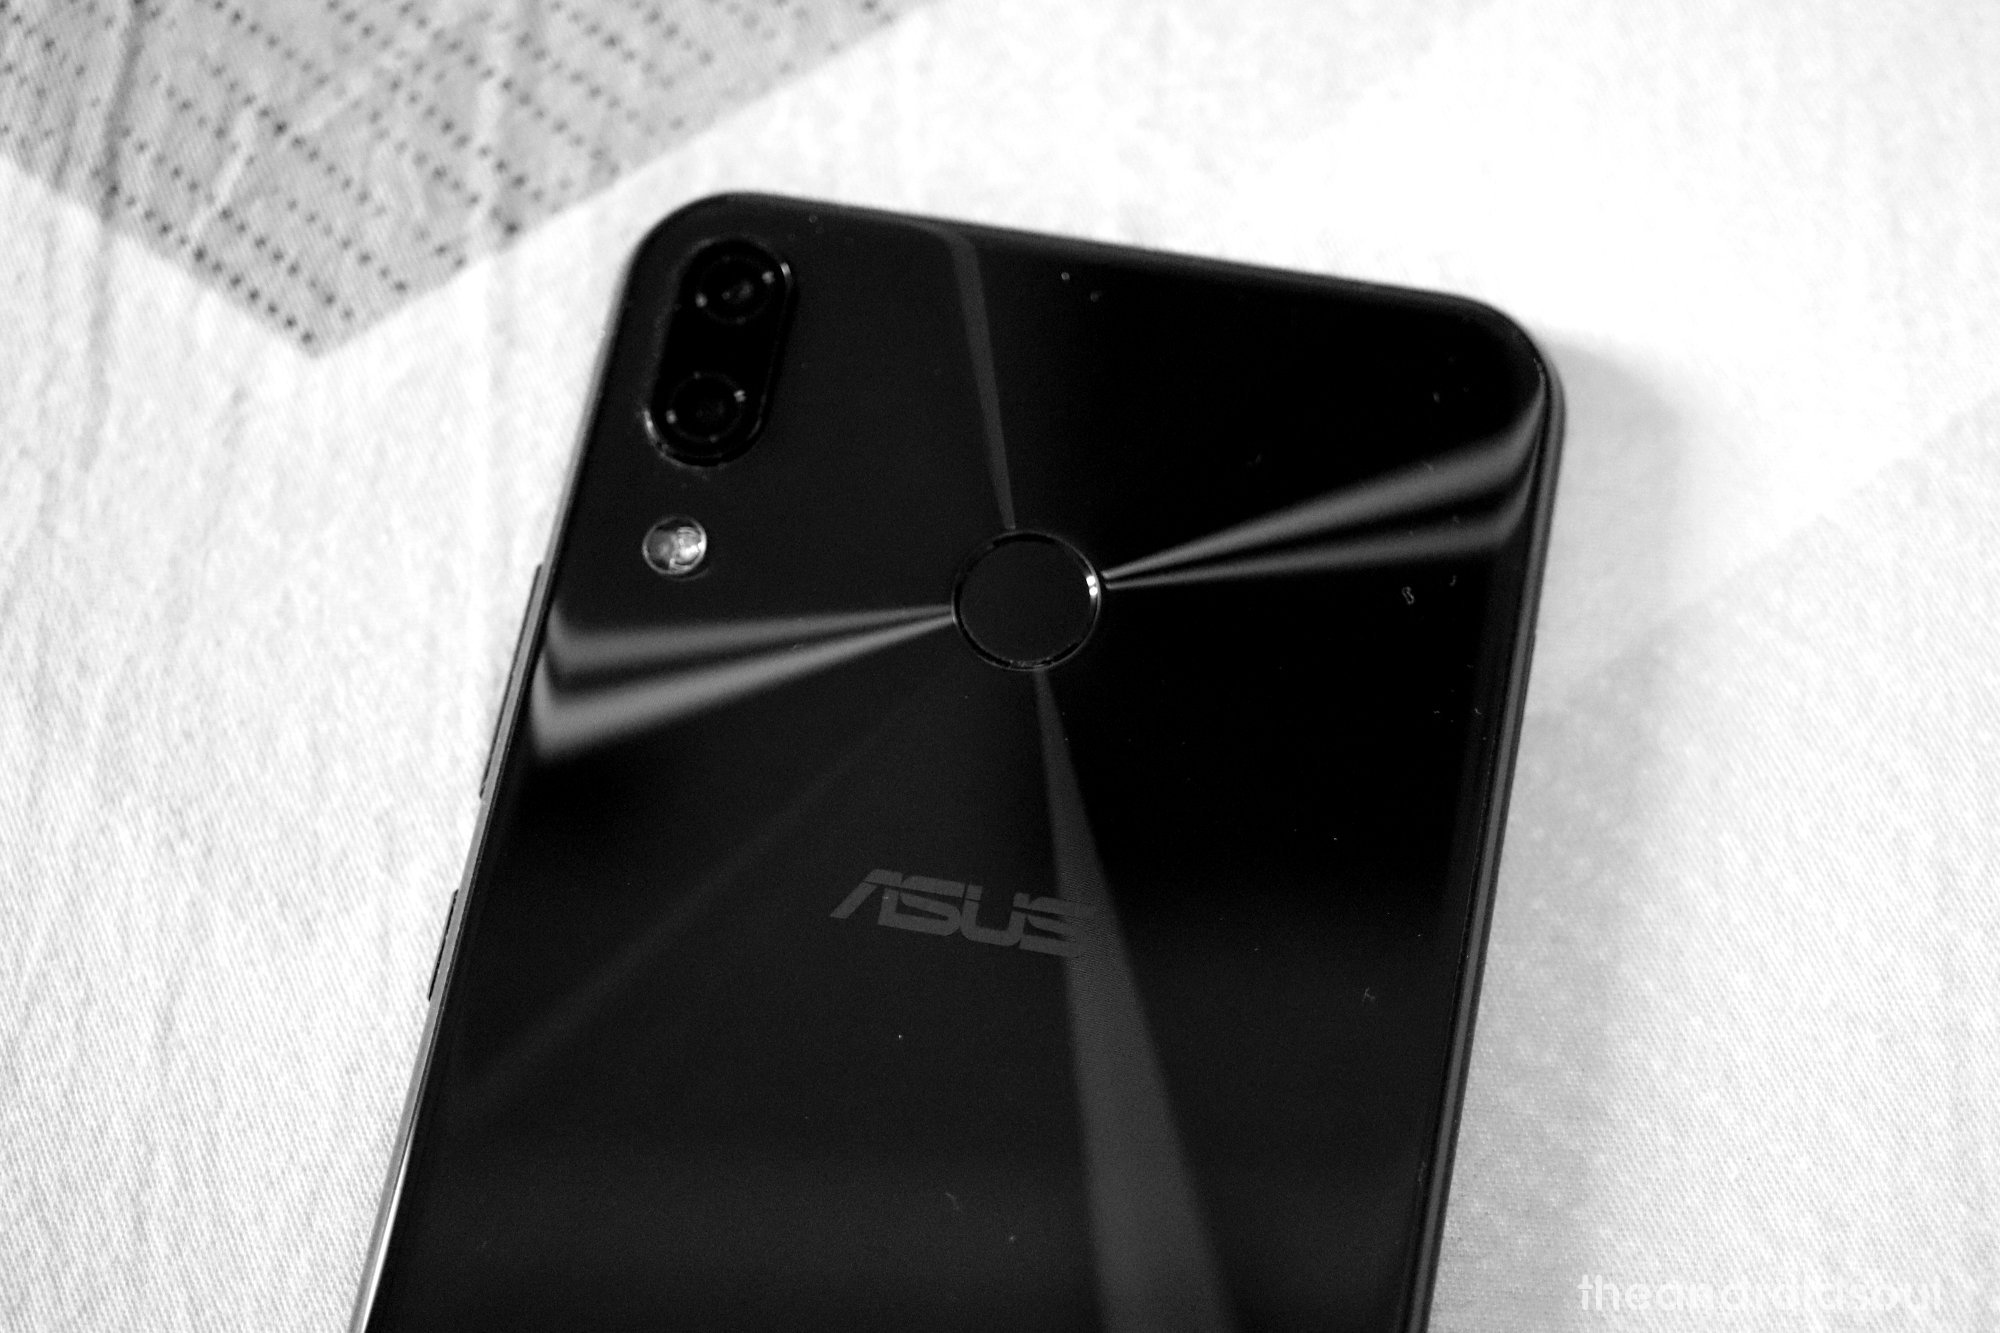 Asus Android 10 update